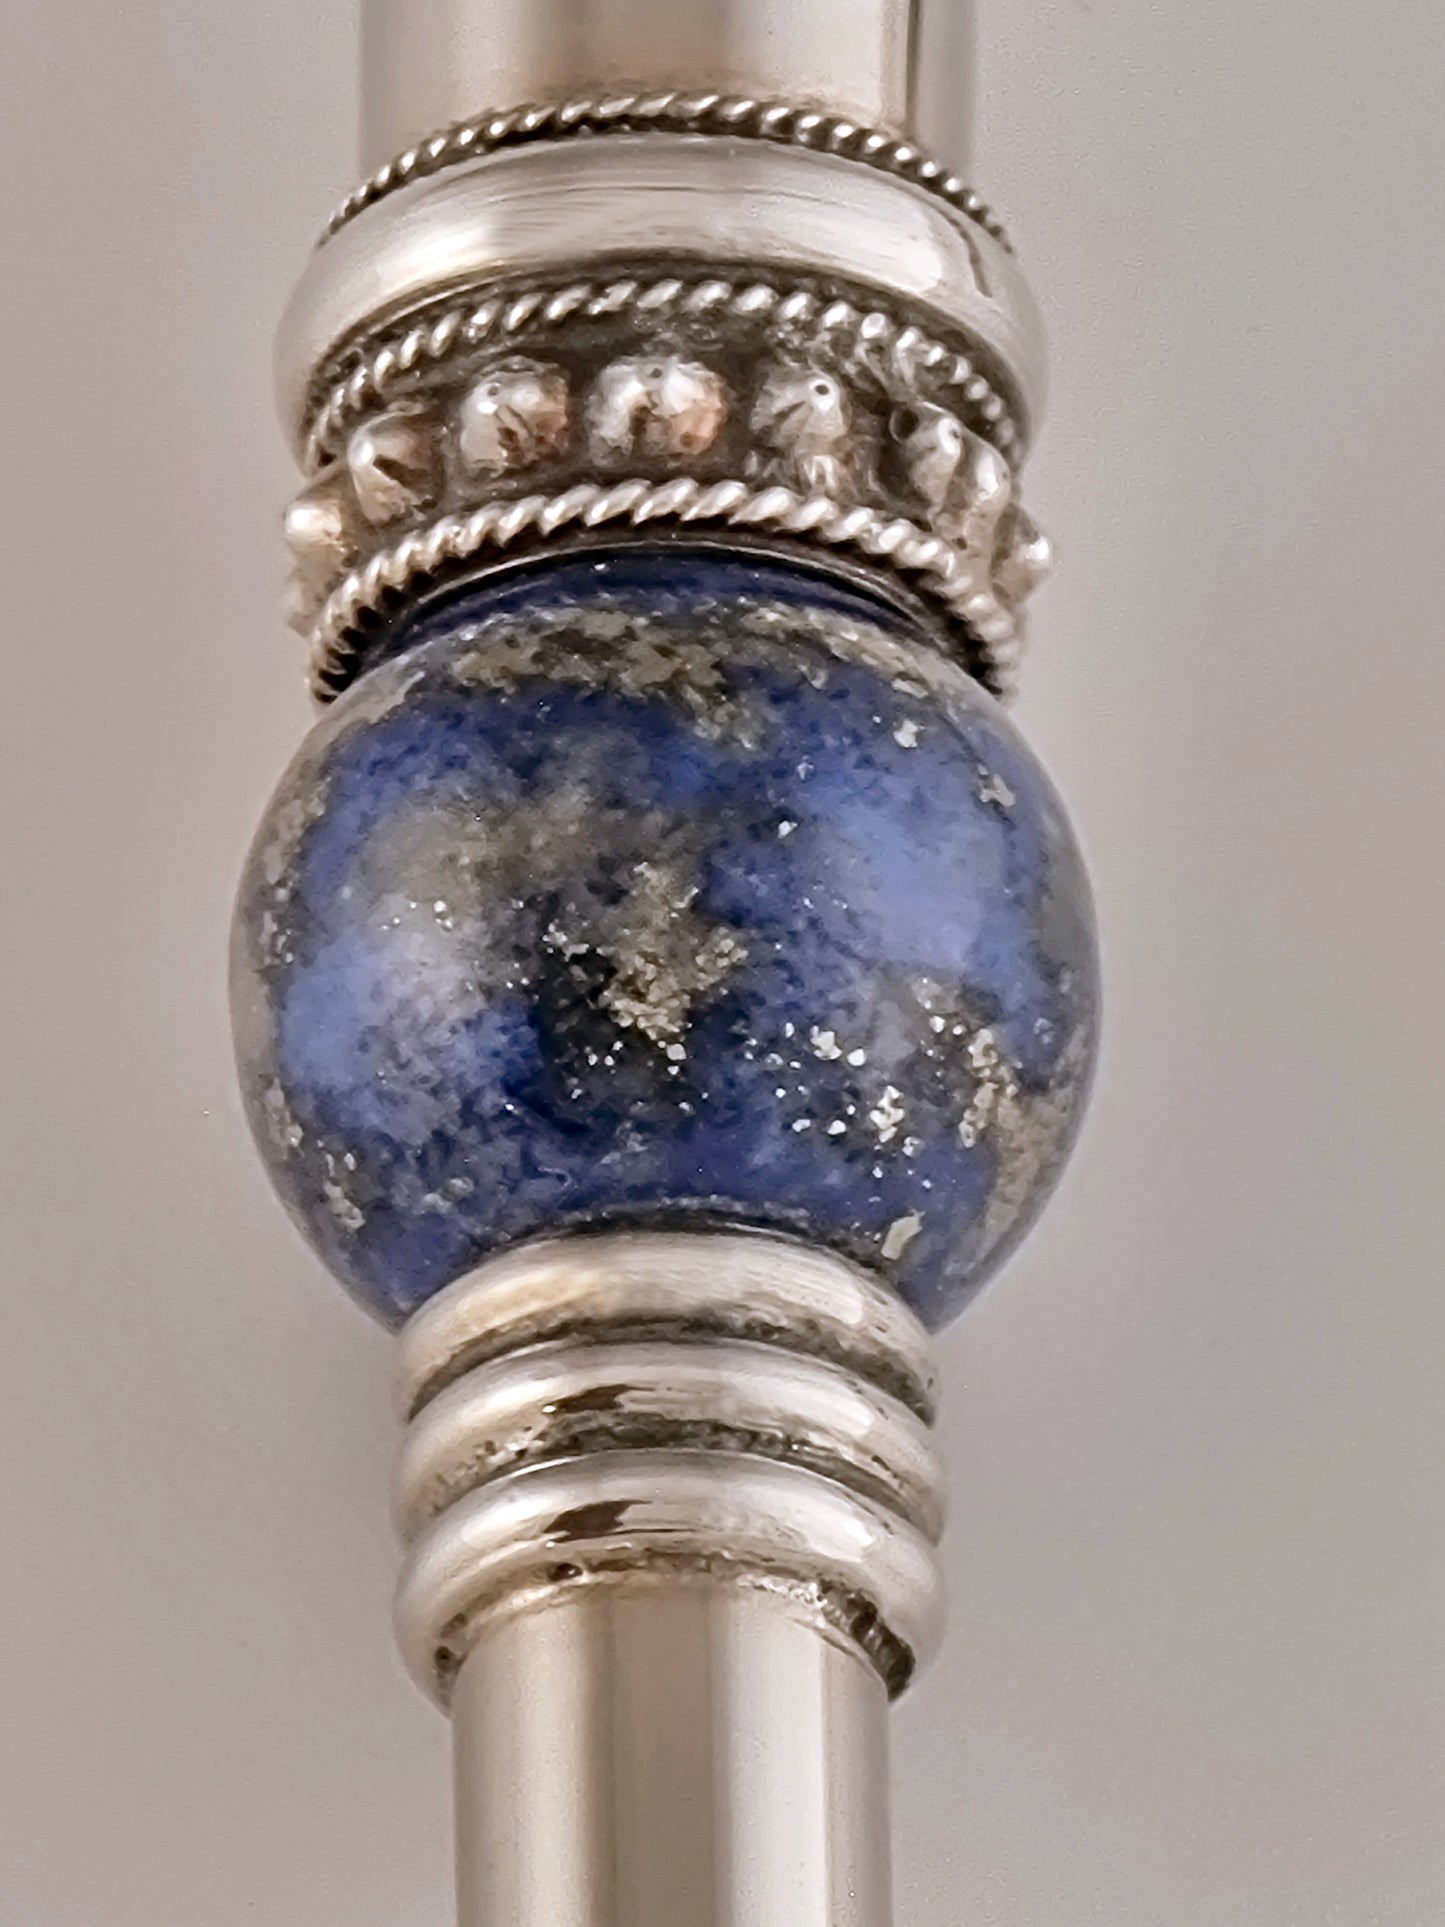 Amos Torah Pointer. This Torah pointer was designed in 1985. It is 8½” long and made of sterling silver and studded with three lapis lazuli stones.